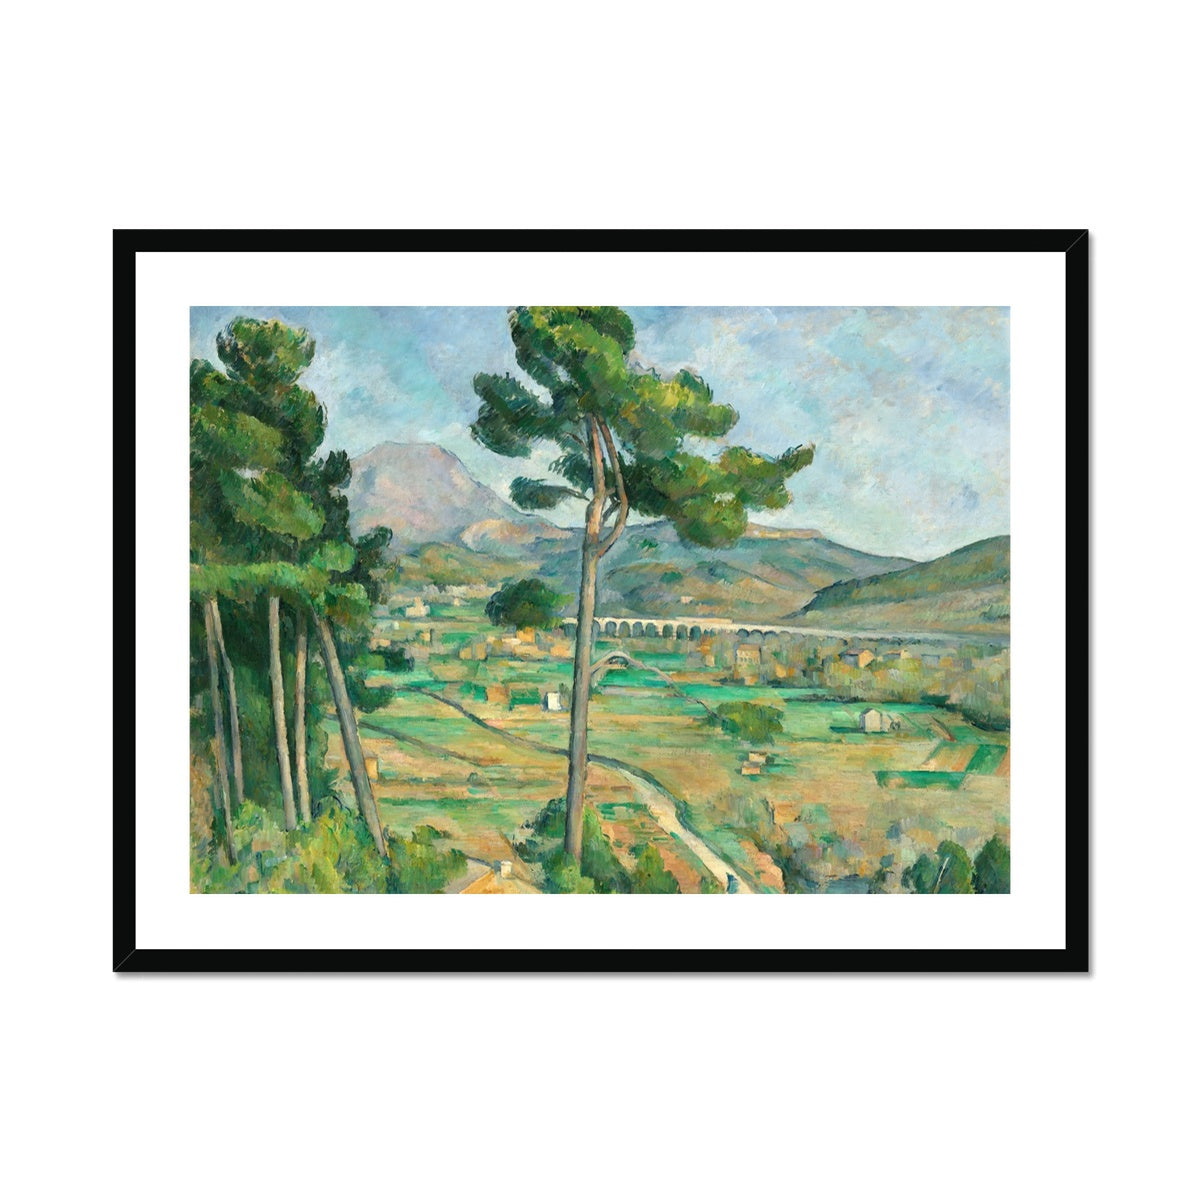 Paul Cézanne Framed Open Edition Art Print. 'Mont Sainte-Victoire and the Viaduct of the Arc River Valley'. Art Gallery Historic Art